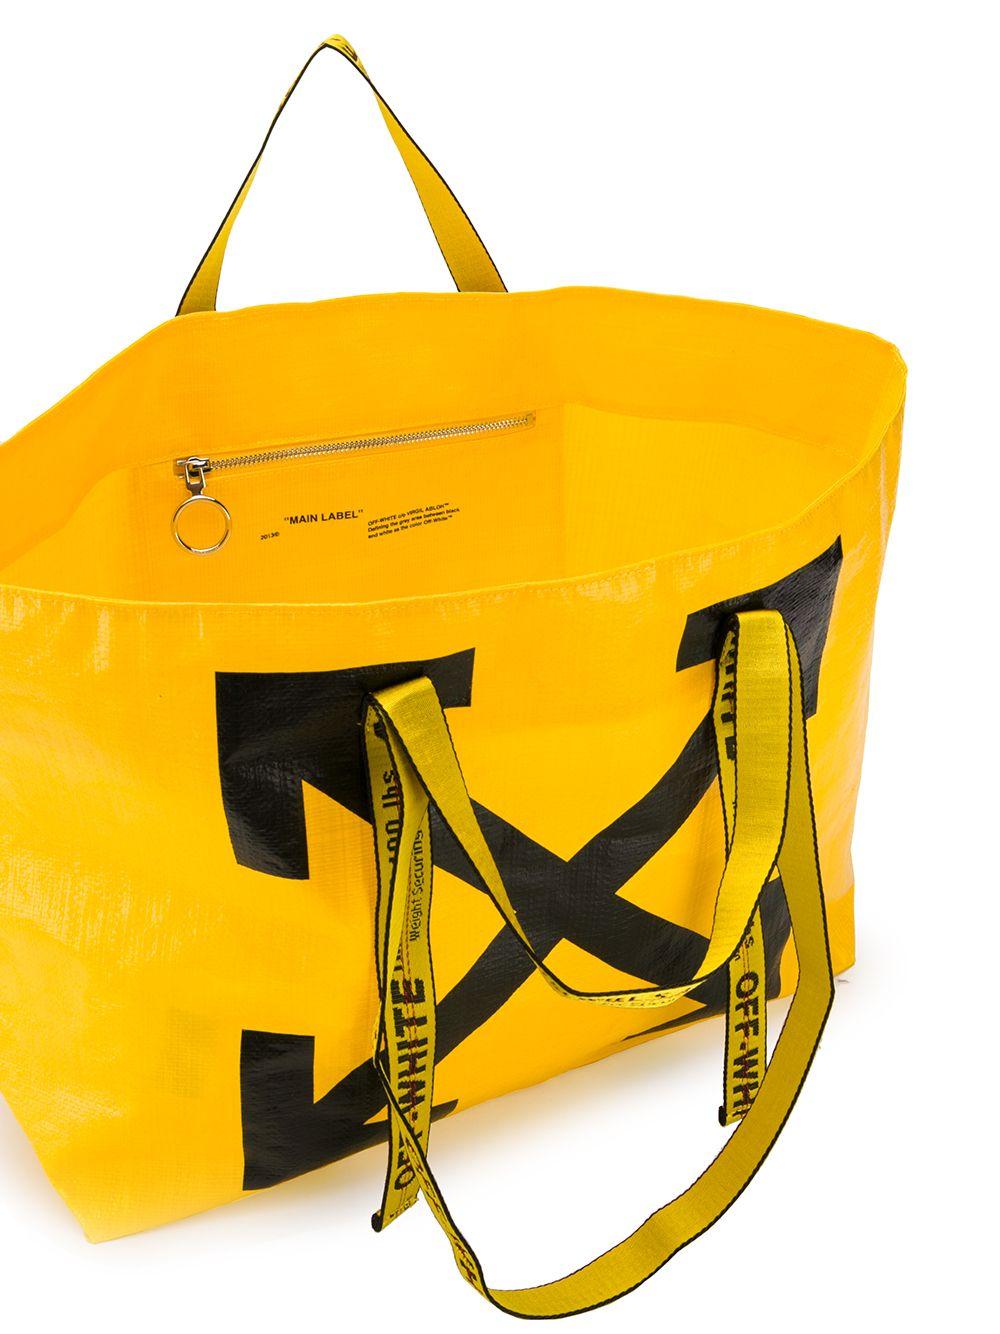 Virgil Abloh Canary Yellow x FOS Tote Bag White - Novelship